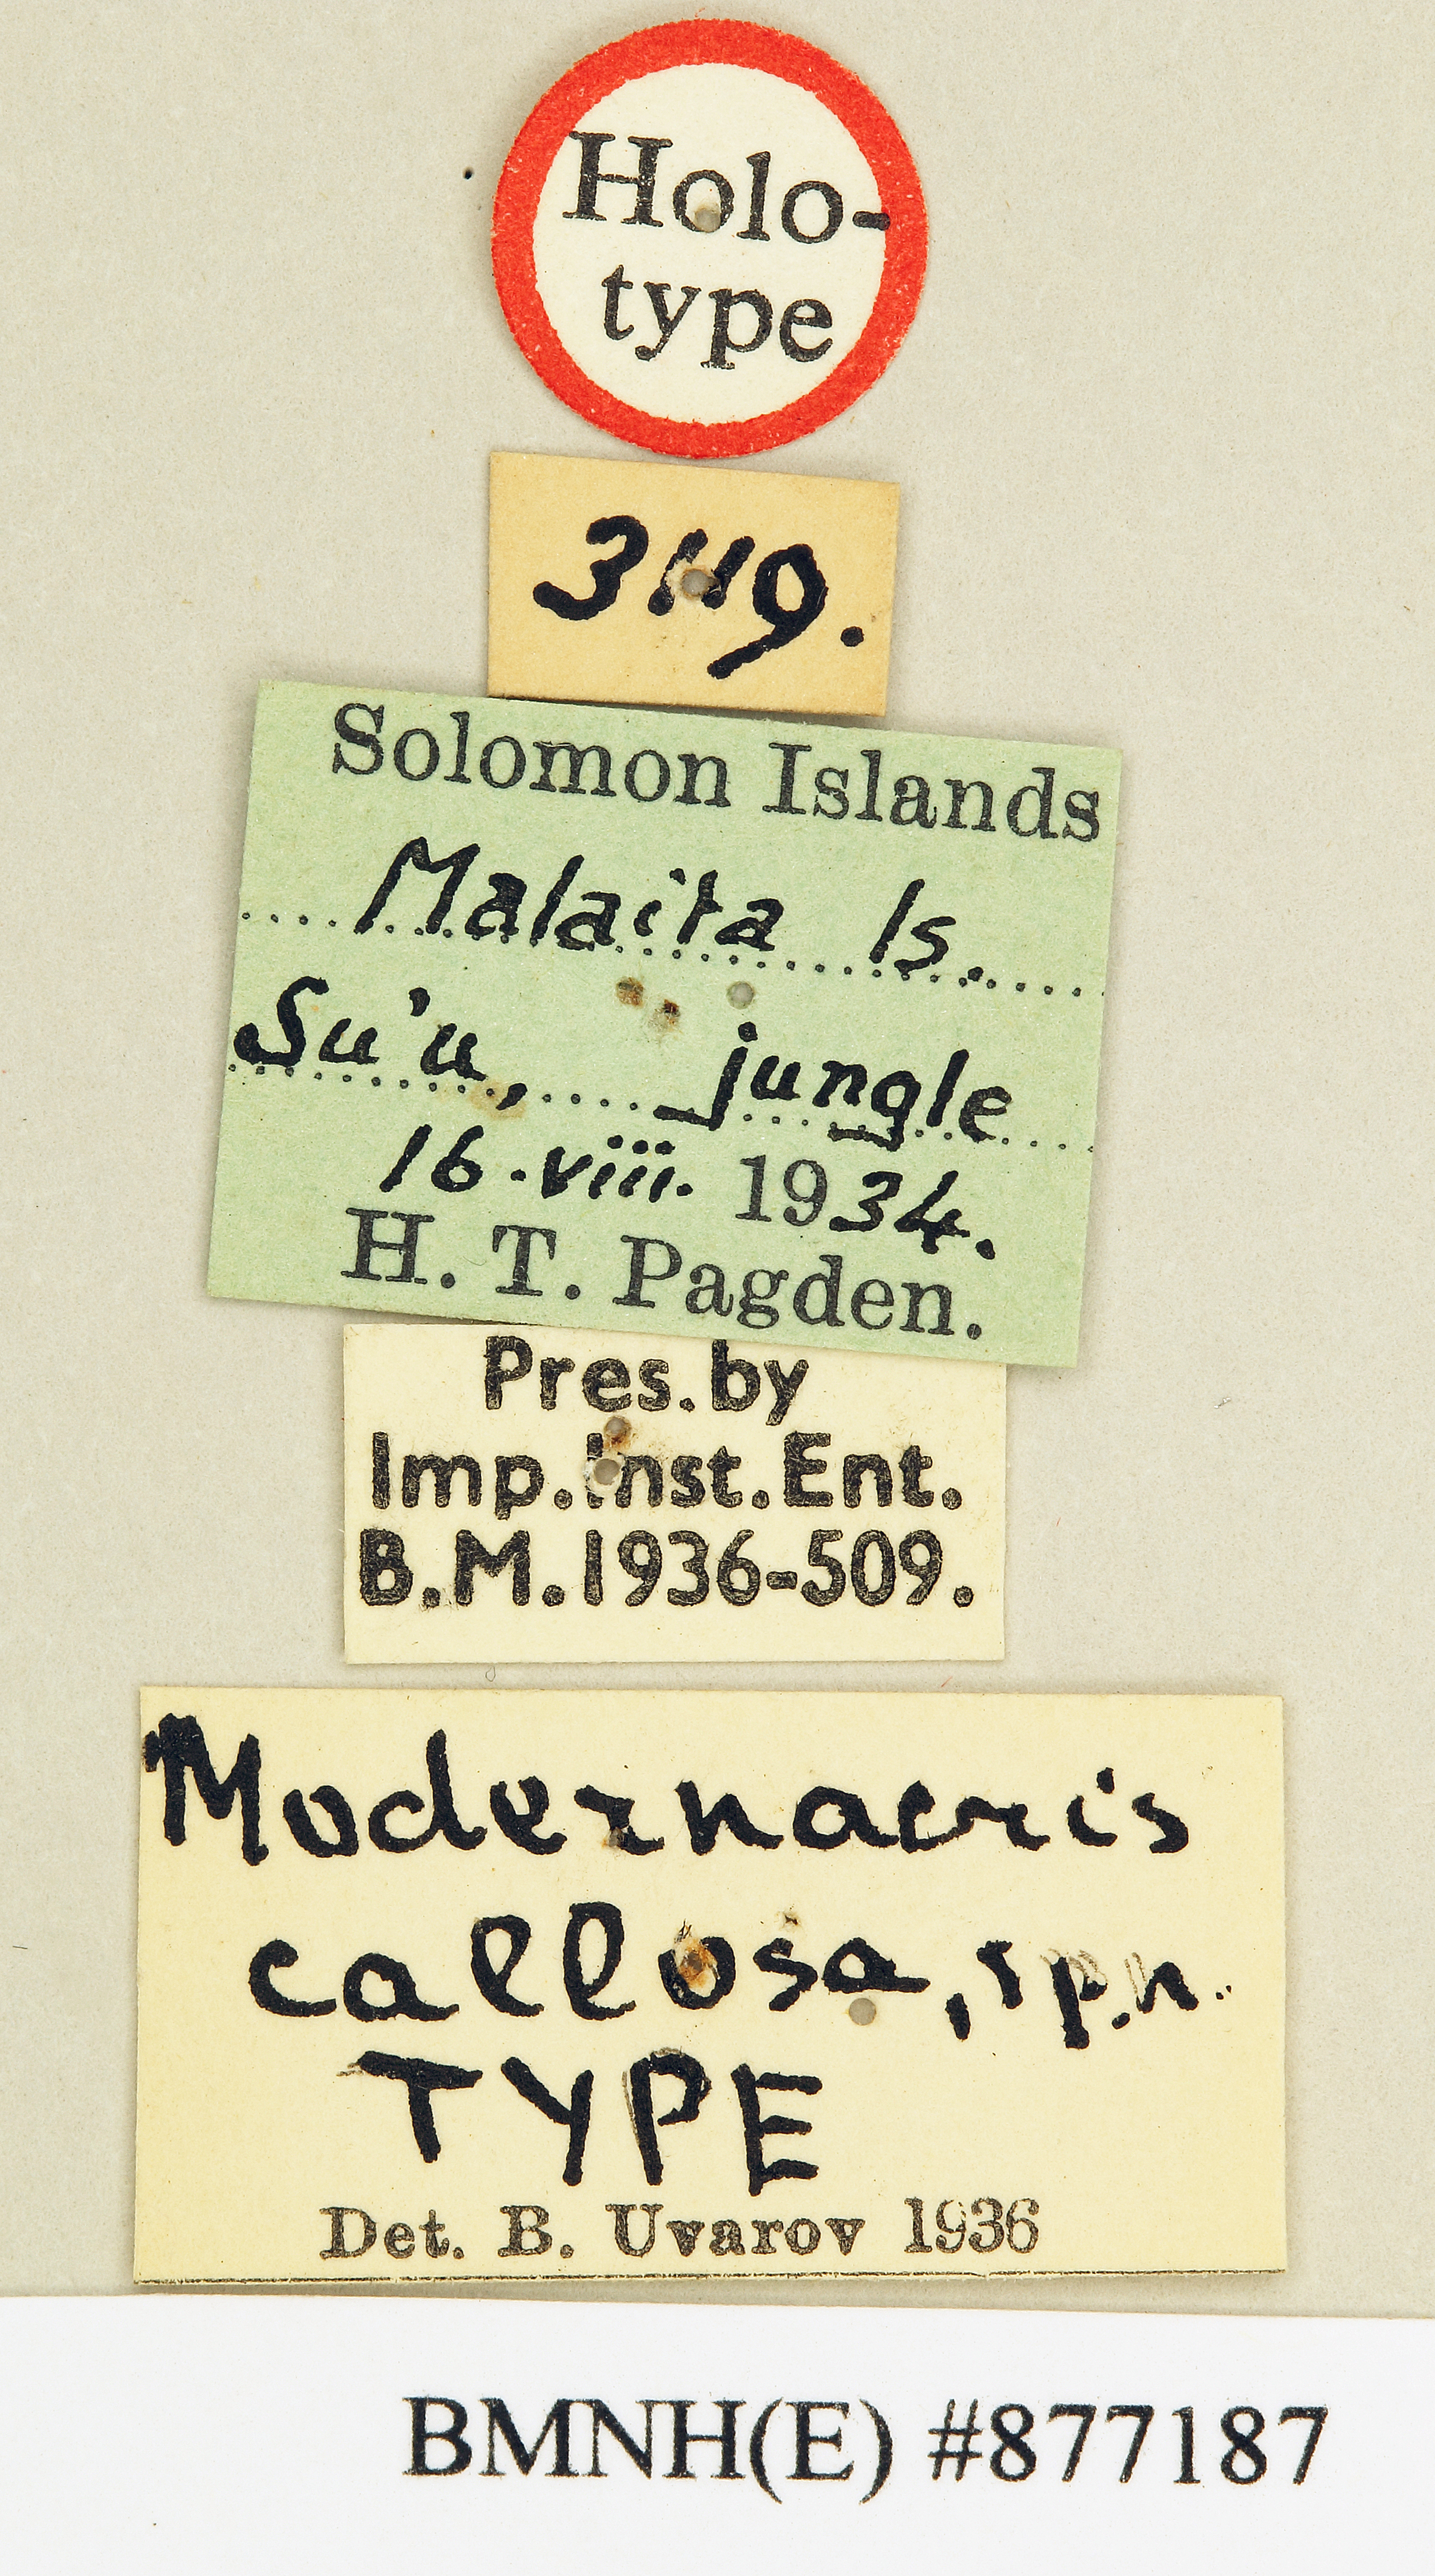 labels (holotype). Depicts CollectionObject 1518345; 3fb33887-e3d9-4763-a6e1-8a25714205a5, a CollectionObject.